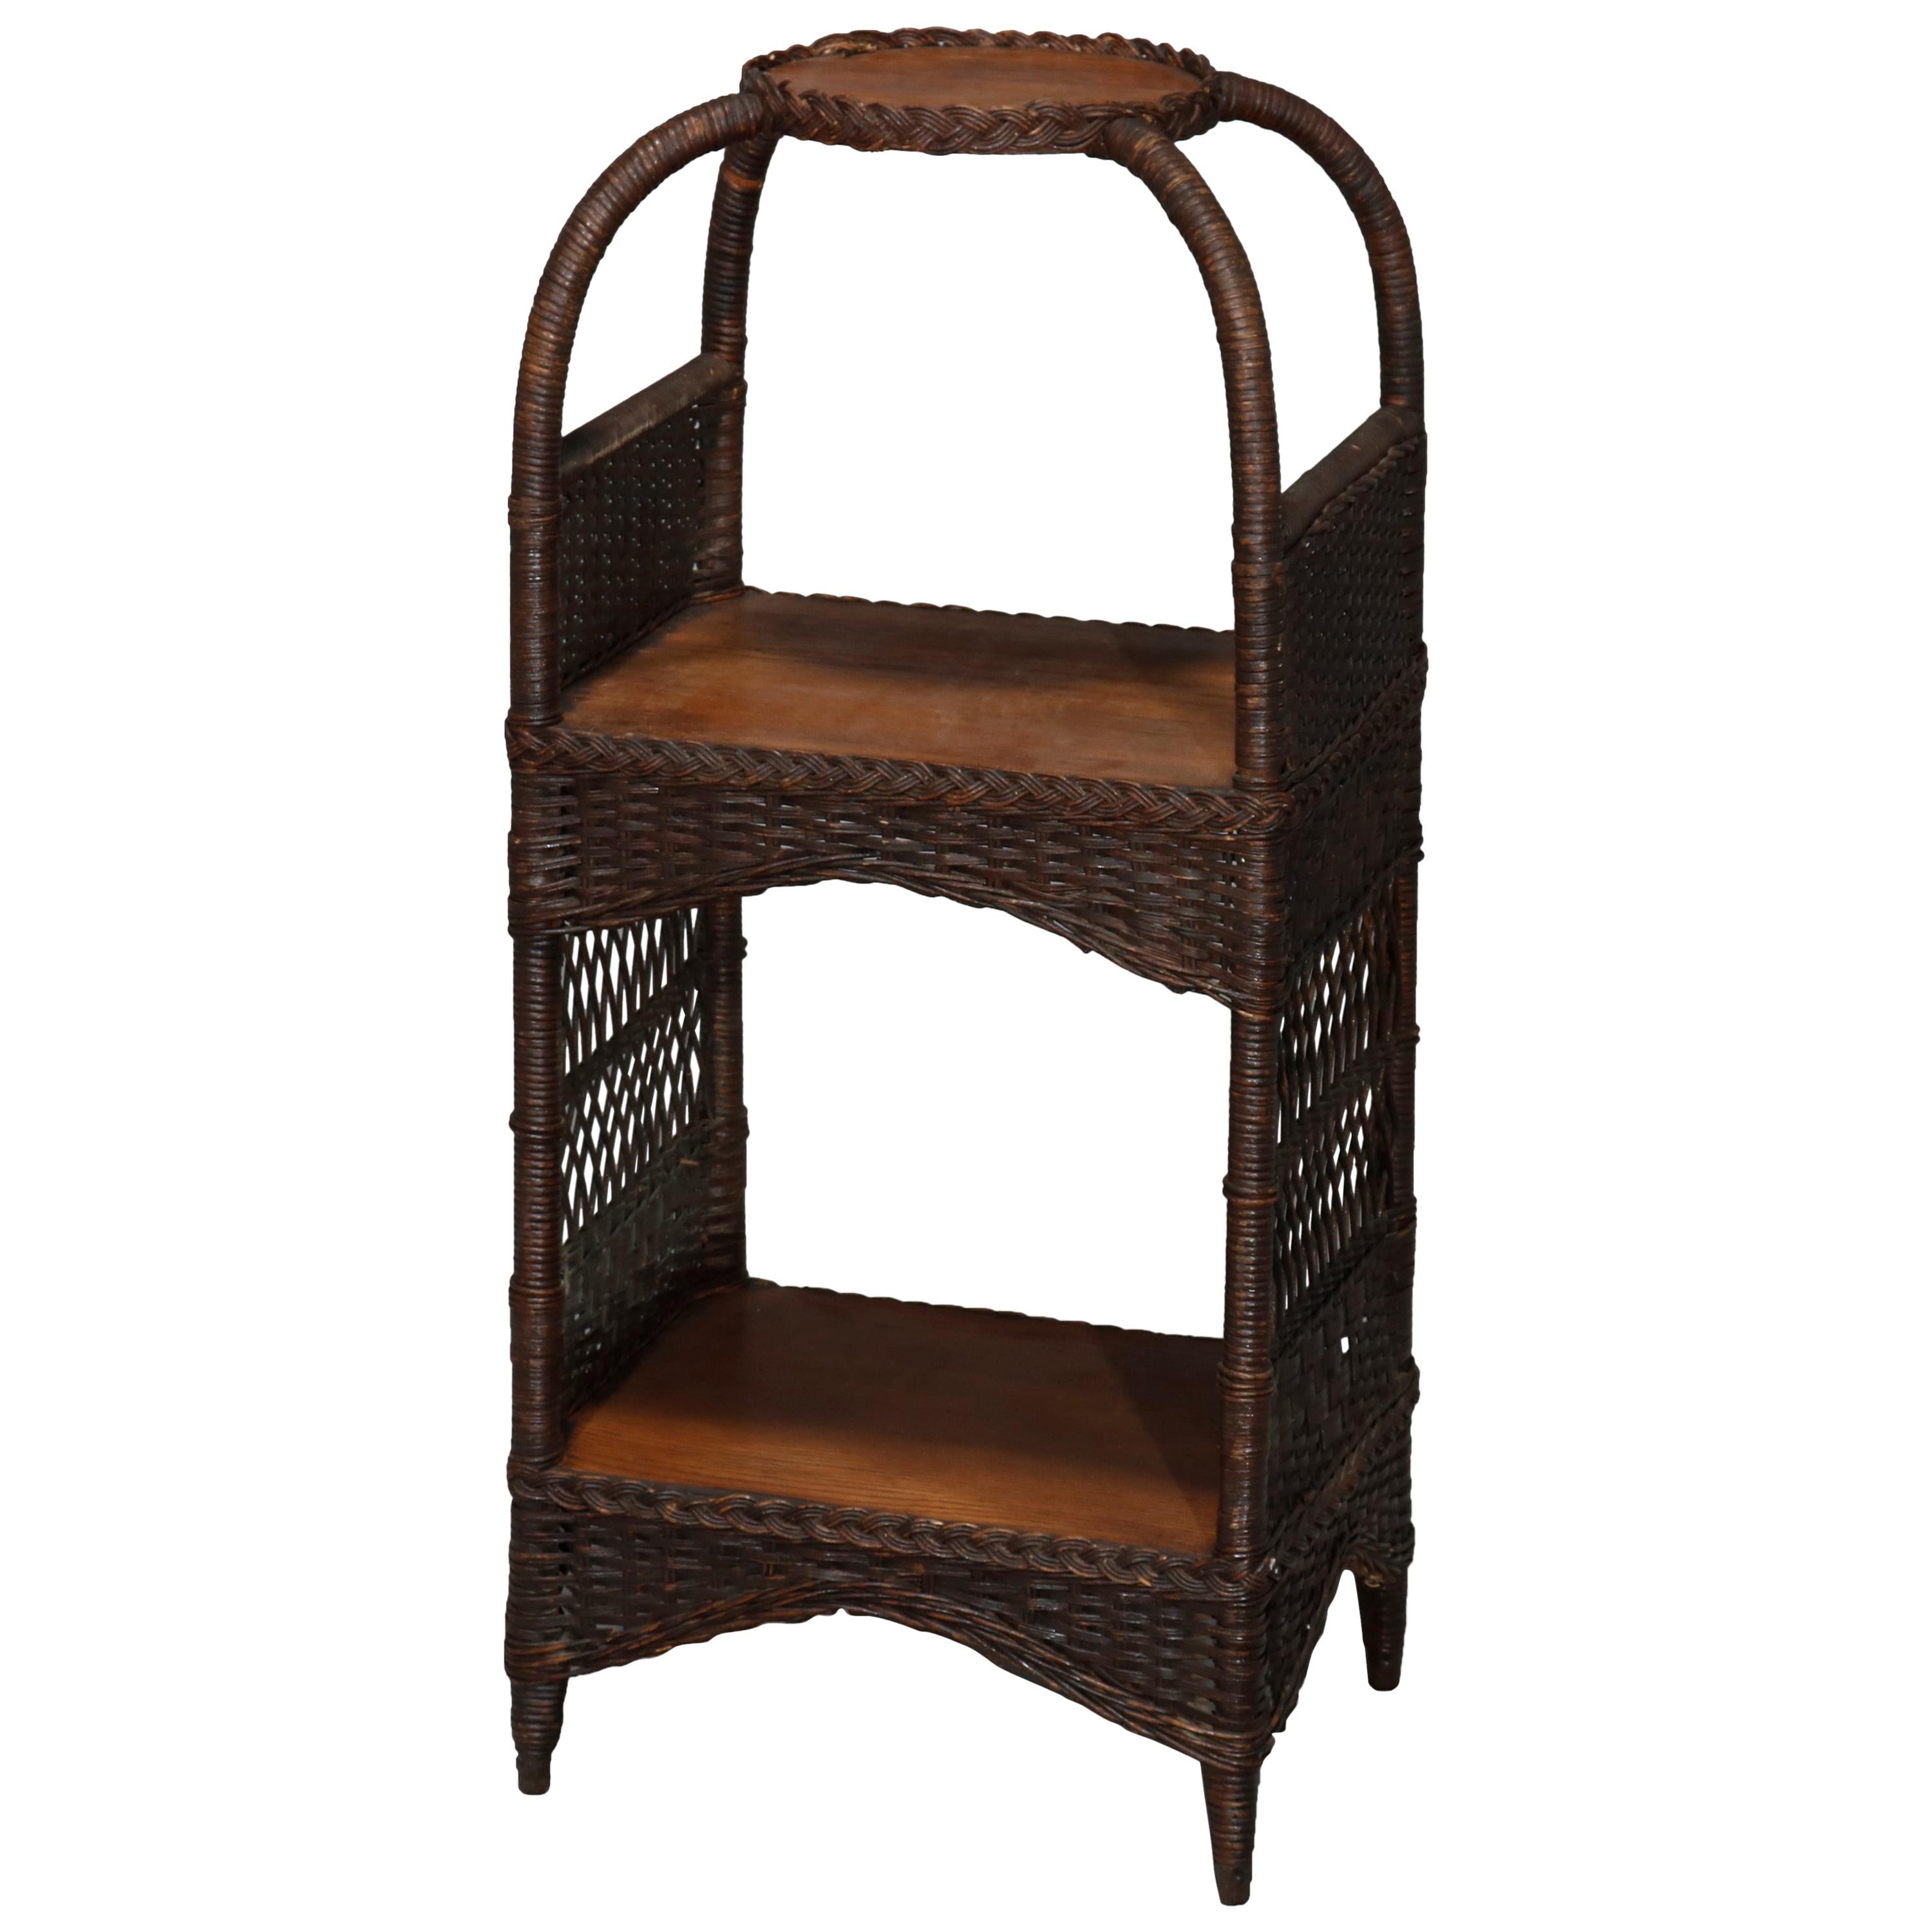 Antique Heywood Wakefield Oak and Wicker Plant Stand, circa 1890